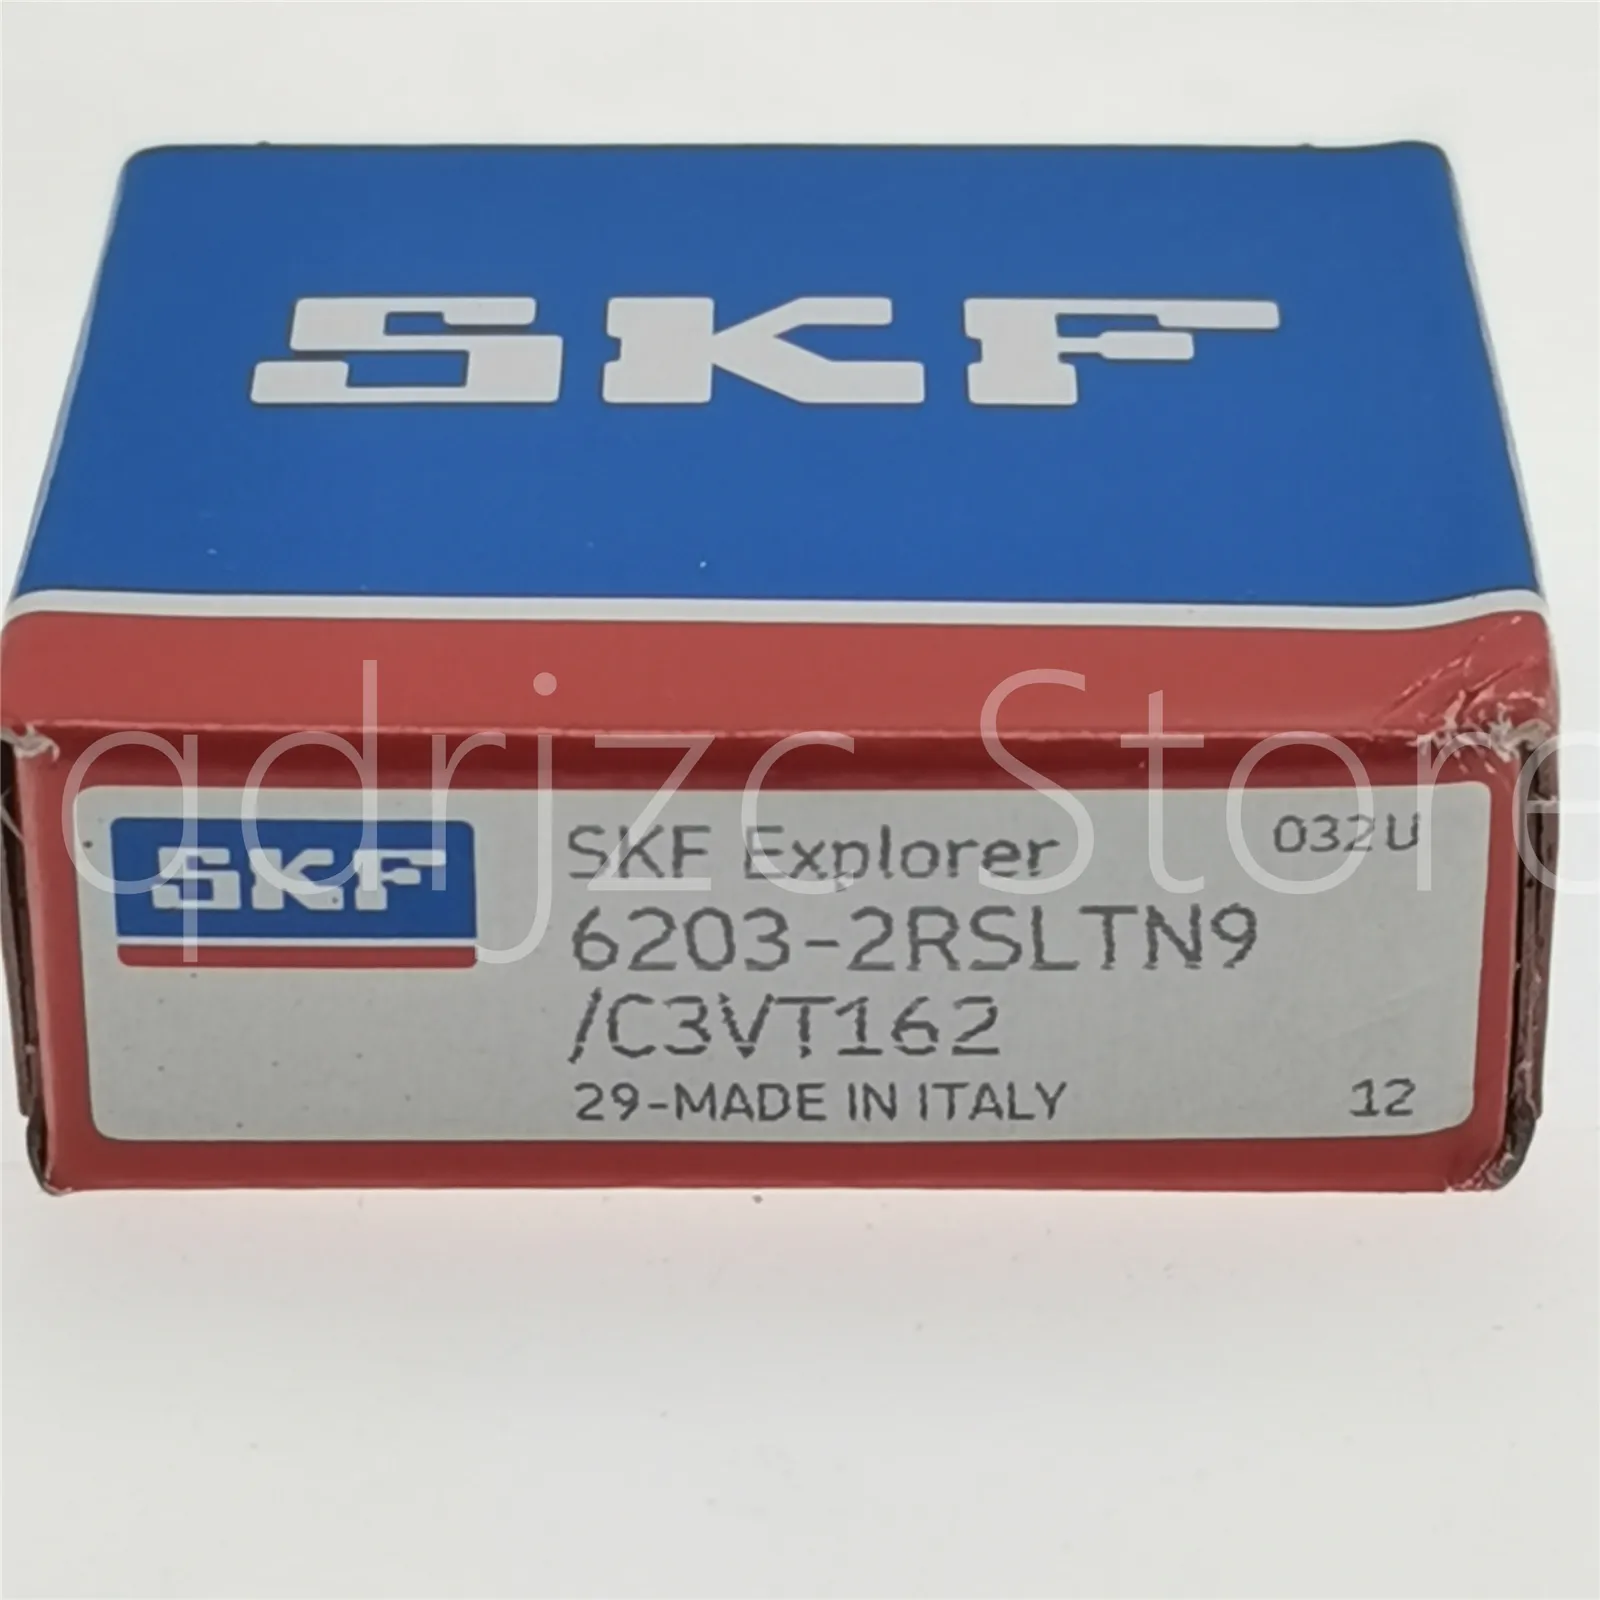 SKF Deep groove ball bearing 6203-2RSLTN9/C3VT162 Nylon cage on both sides of the rubber seal